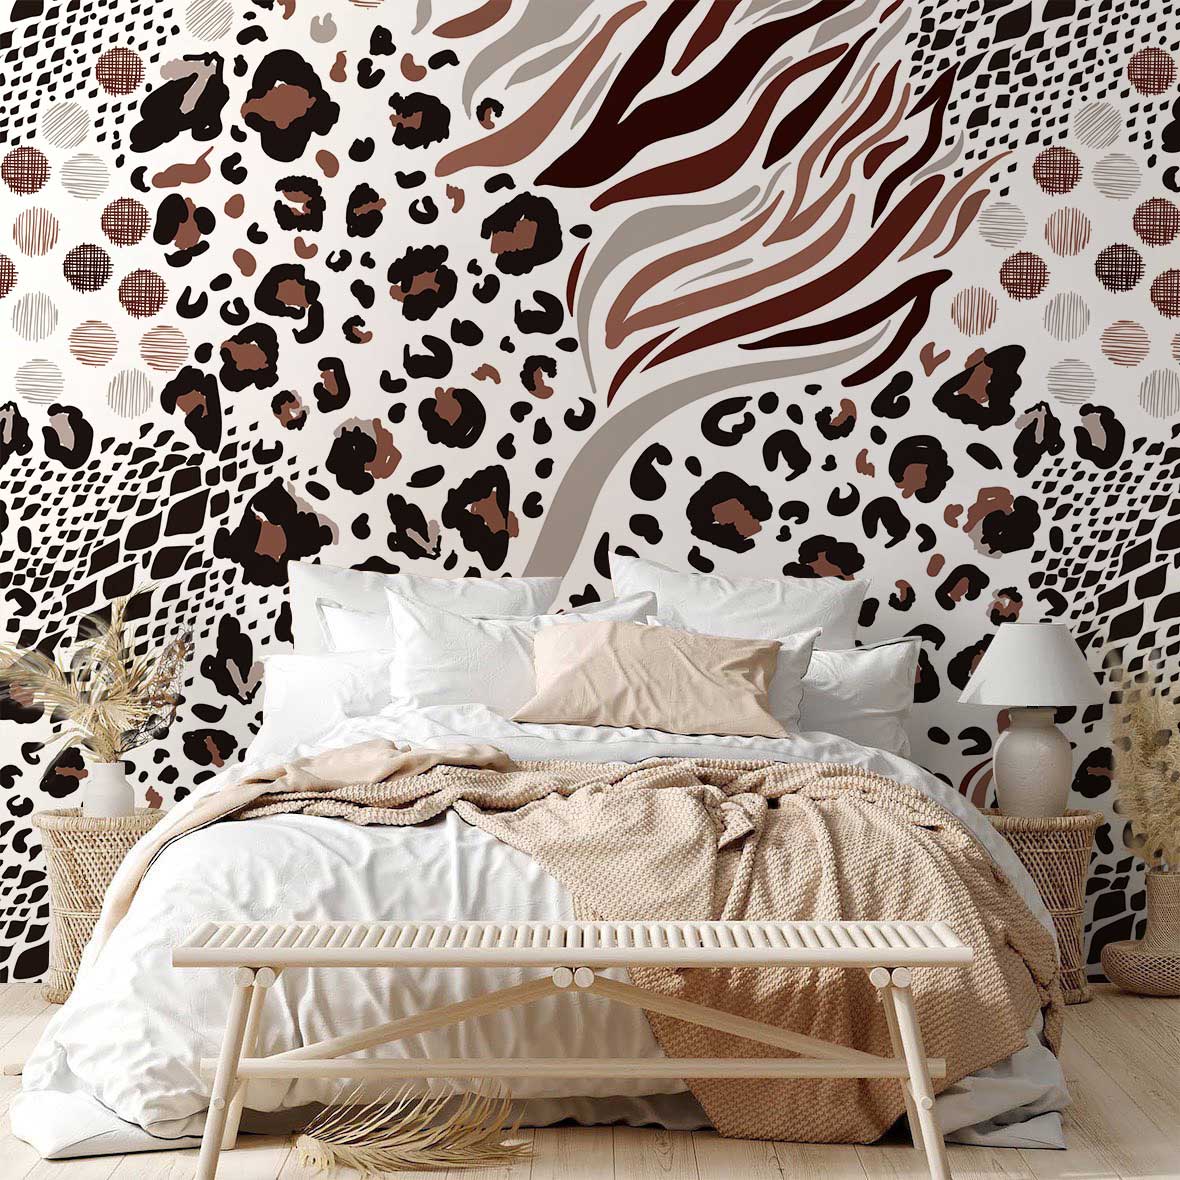 bedroom decoration wallpaper mural with a variegated design of fur and animals